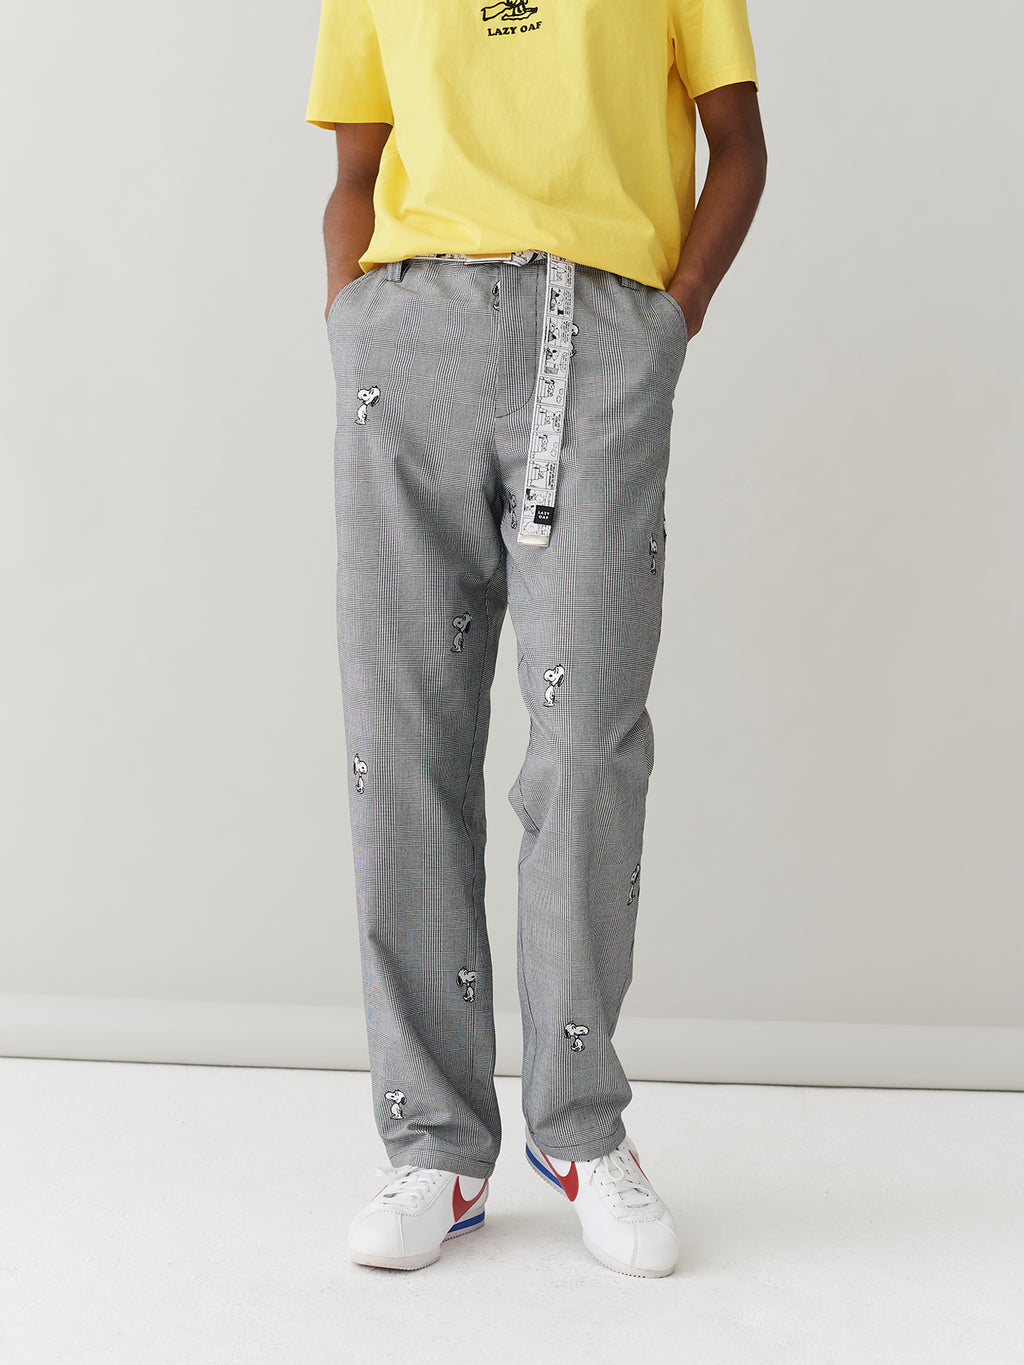 mens-peanuts-x-lazy-oaf collection-men-new-in-1 collection-mens-trousers collection-mens-lazy-oaf-x-peanuts collection-oaffice-xmas-party